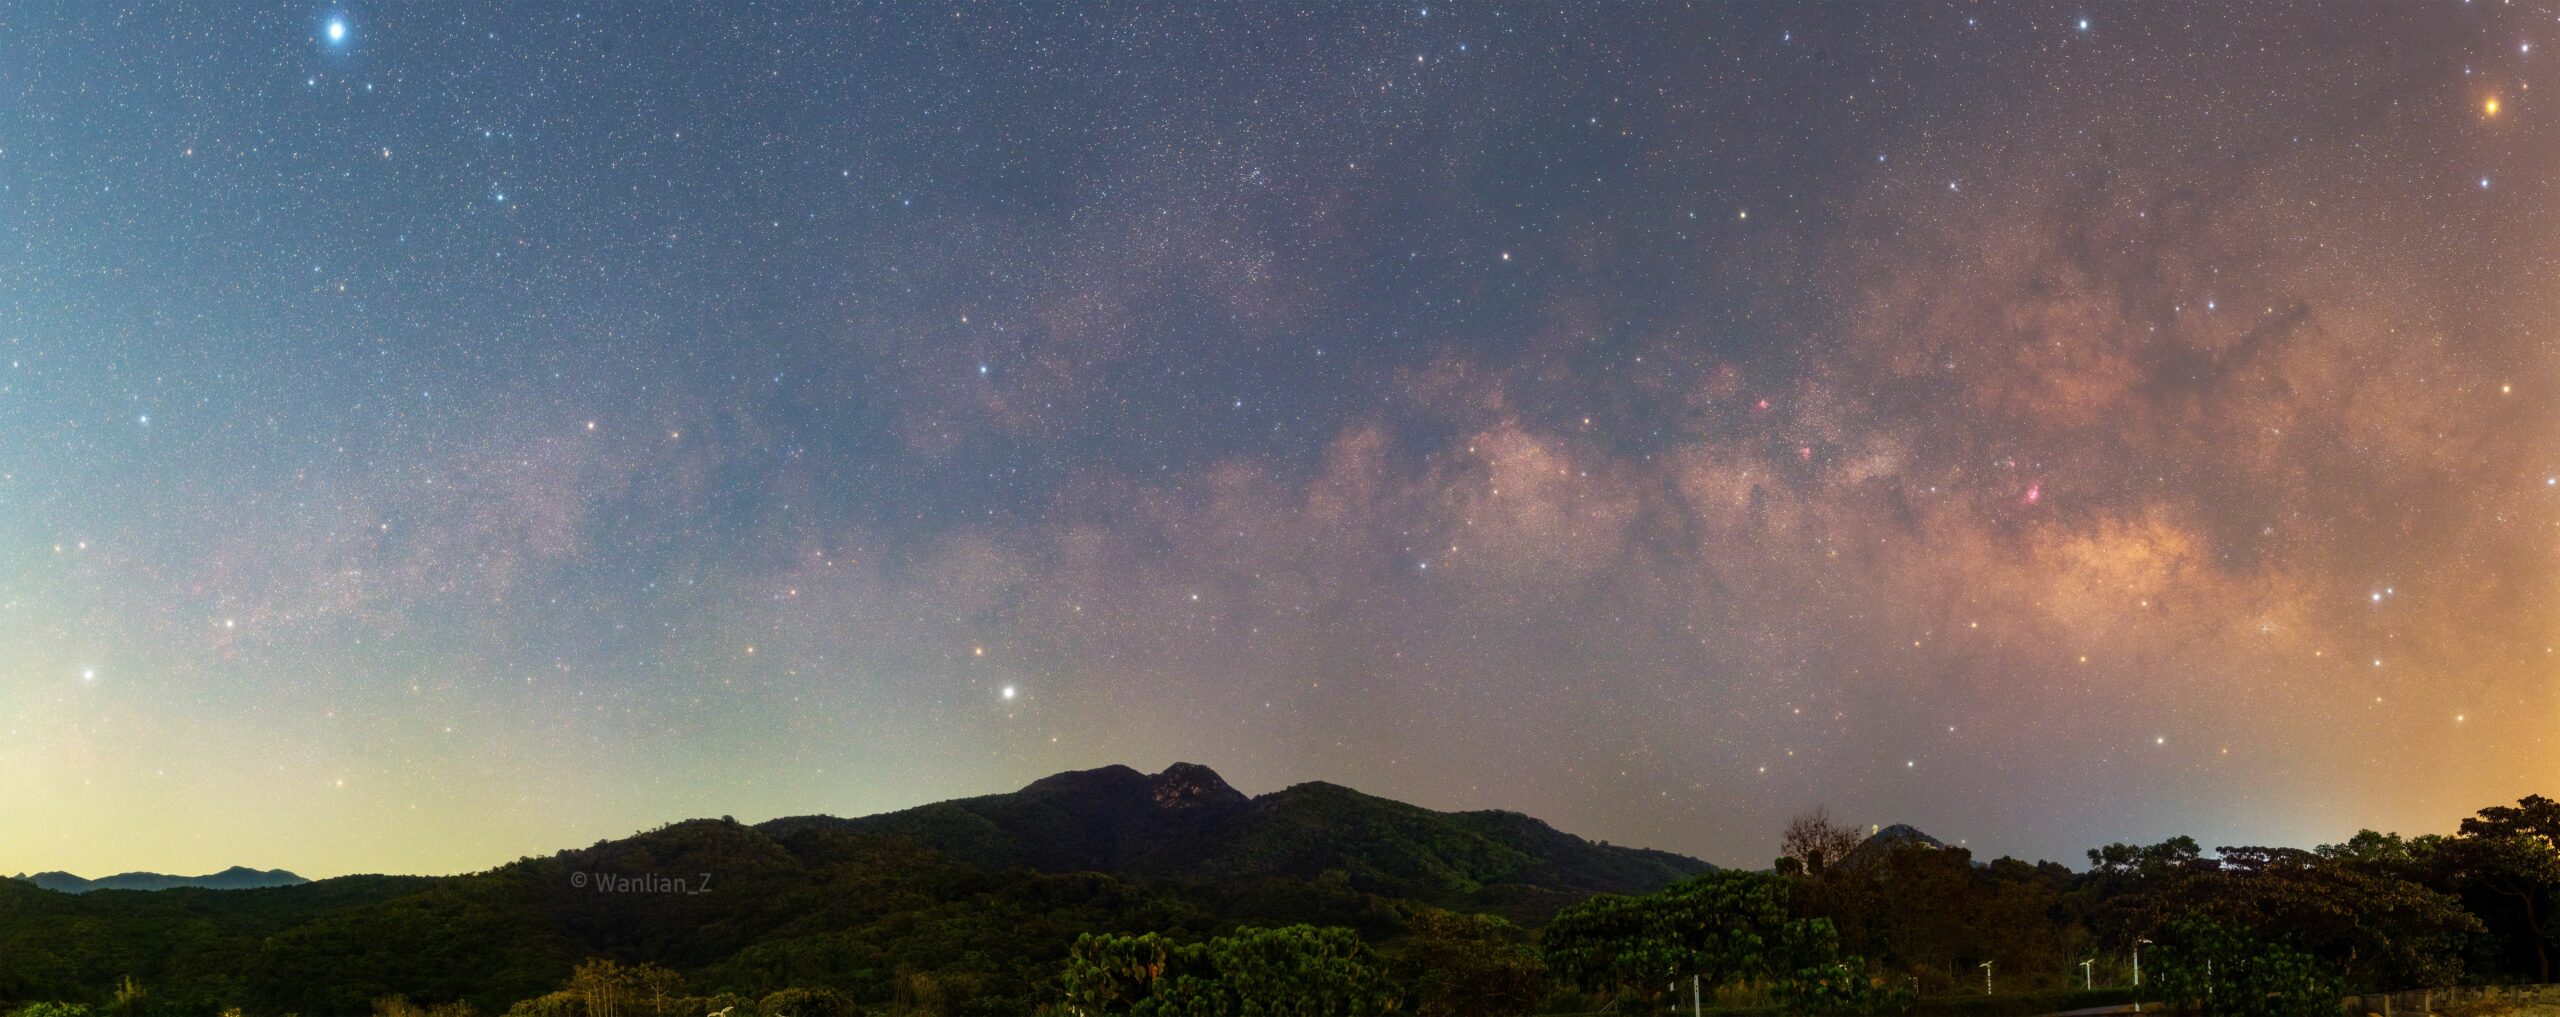 Community of Xichong recognized as first International Dark Sky Community in China Image